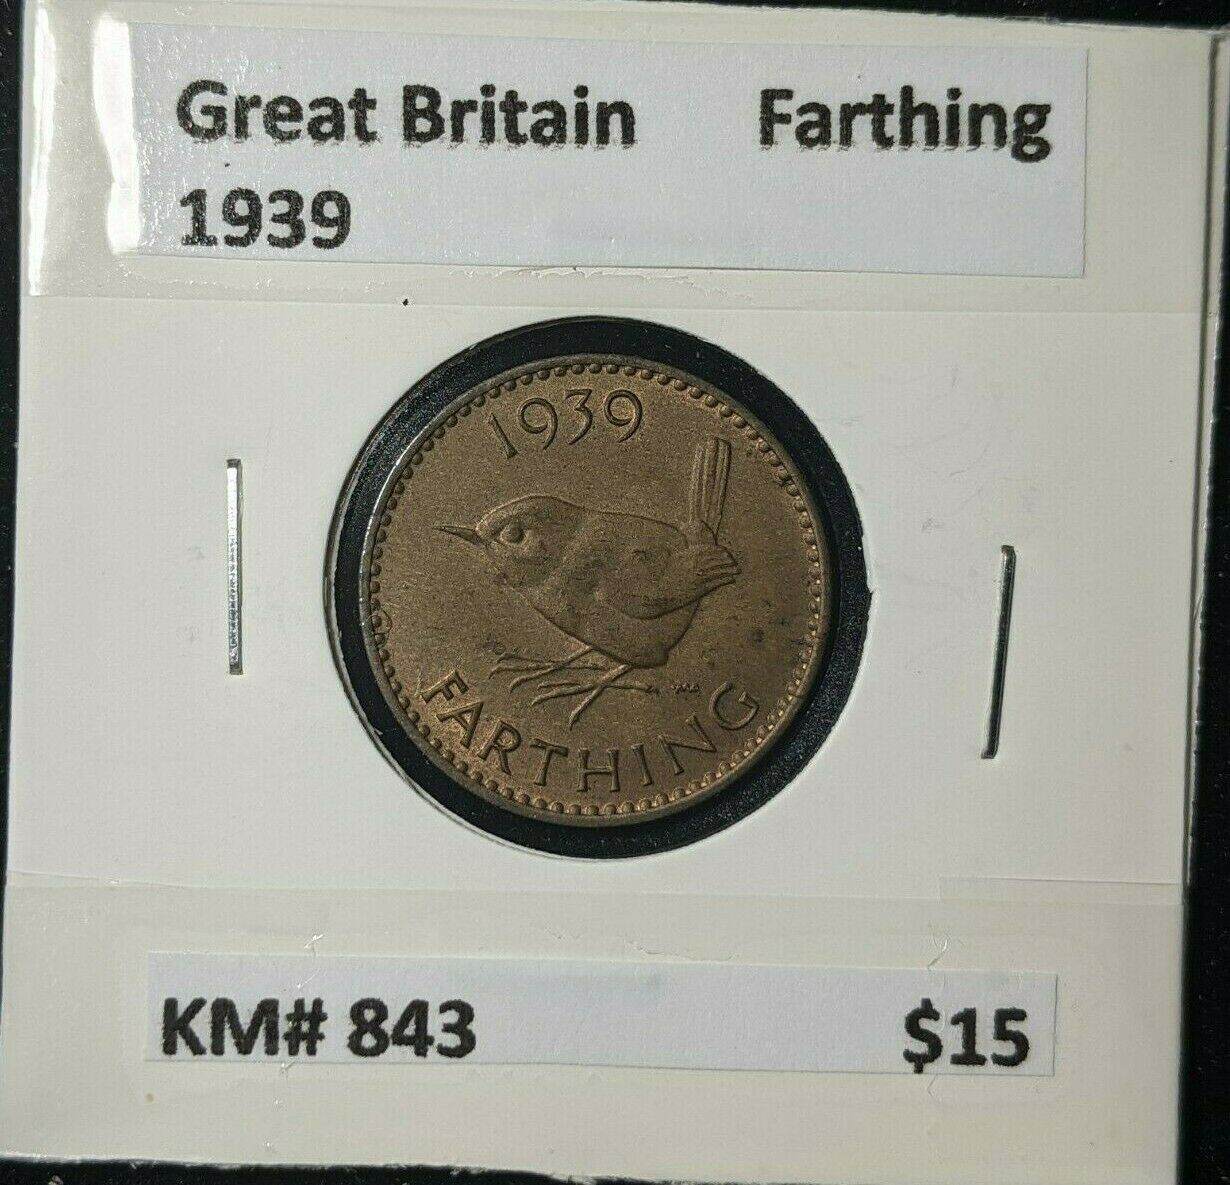 Great Britain 1939 1/4d Farthing KM# 843 #156